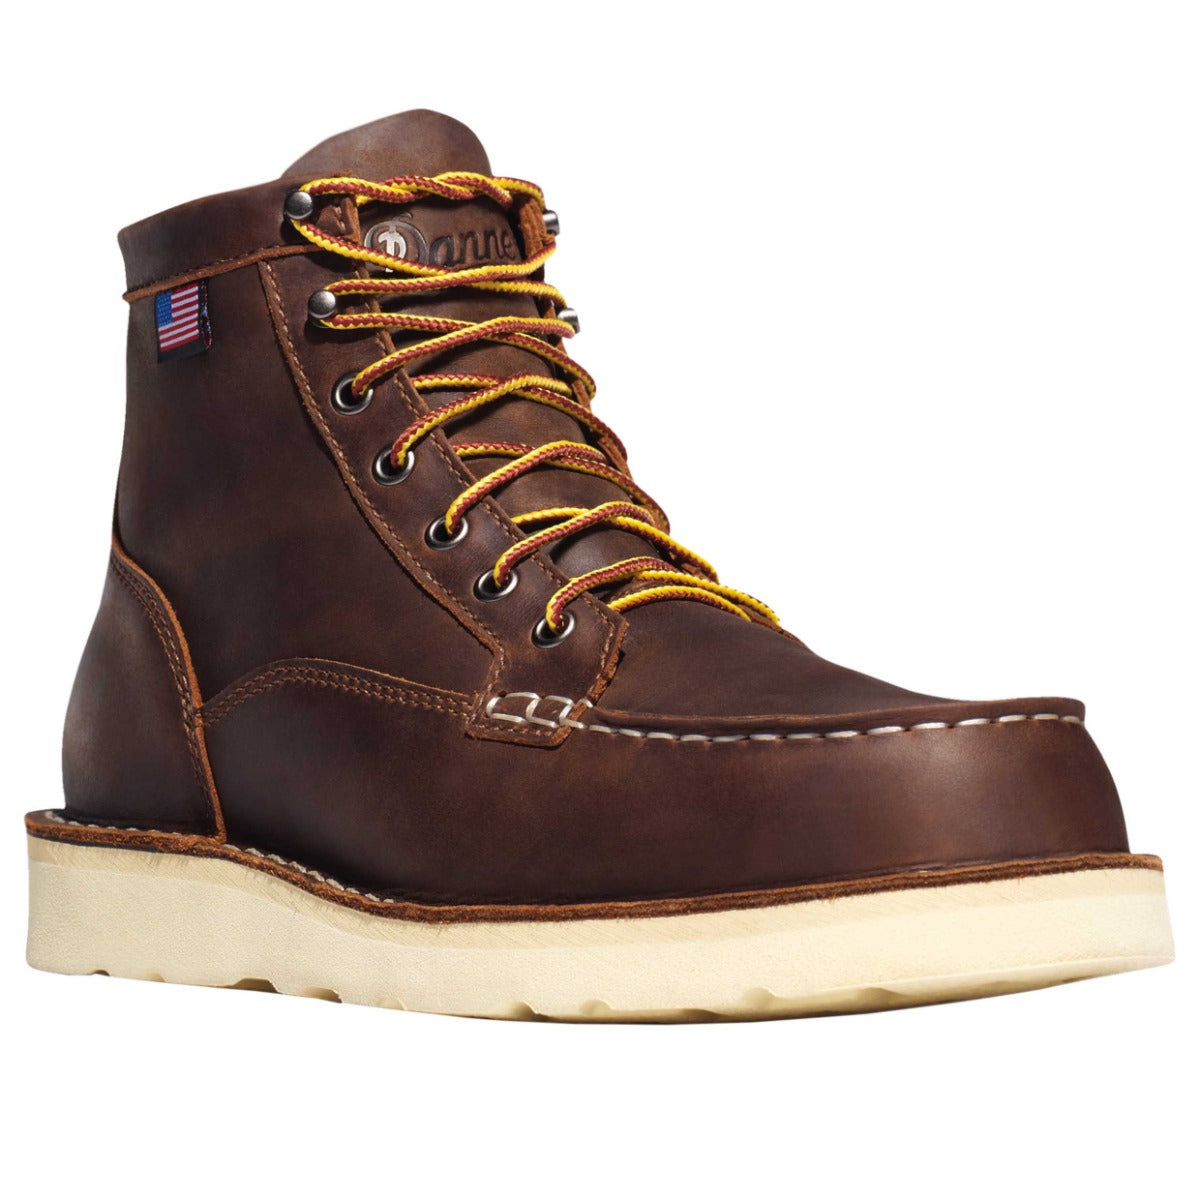 Brown Leather ‘Bull Run Moc Toe’ Lace-Up Boots Boot Danner   